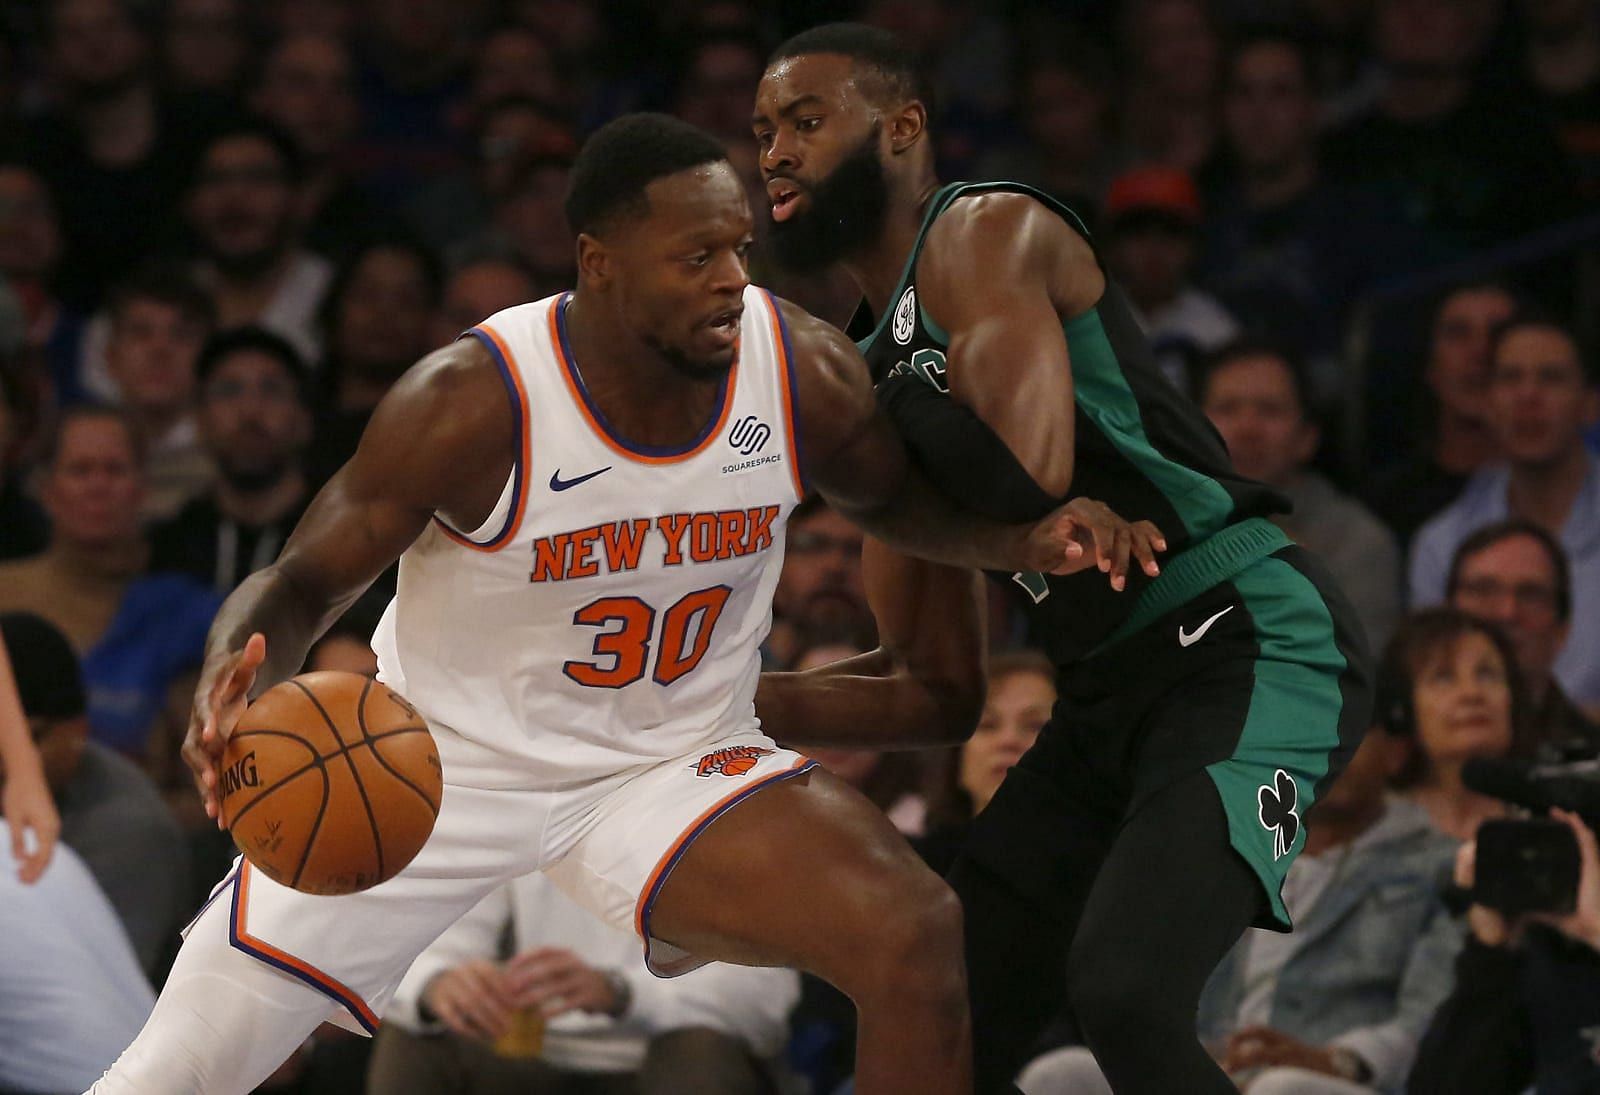 The New York Knicks and the Boston Celtics will renew their traditional rivalry in their season opener at MSG on Tuesday. [Photo: Hardwood Houdini]